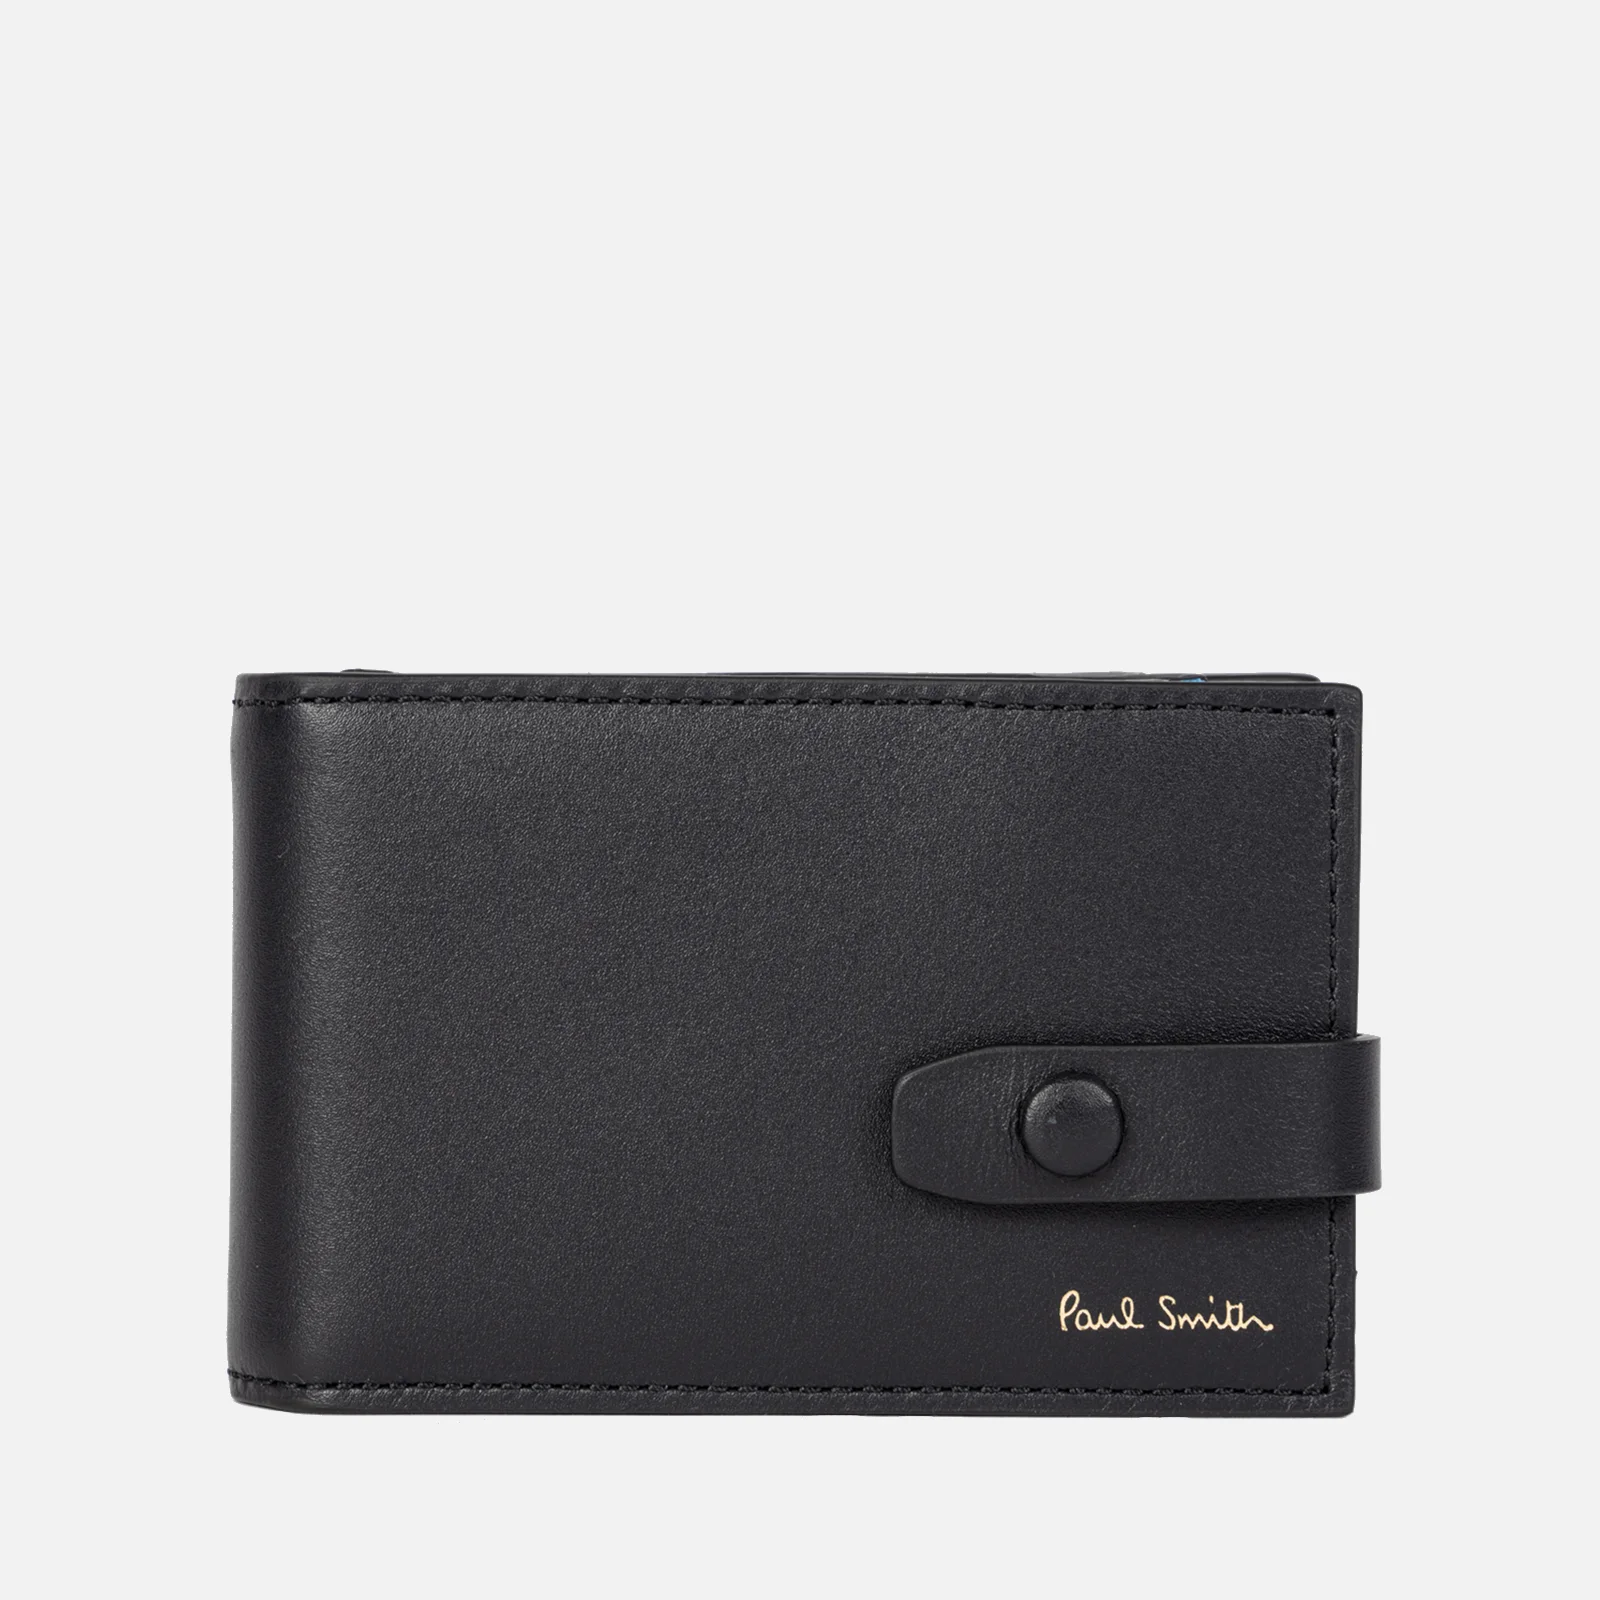 Paul Smith Leather Wallet Image 1